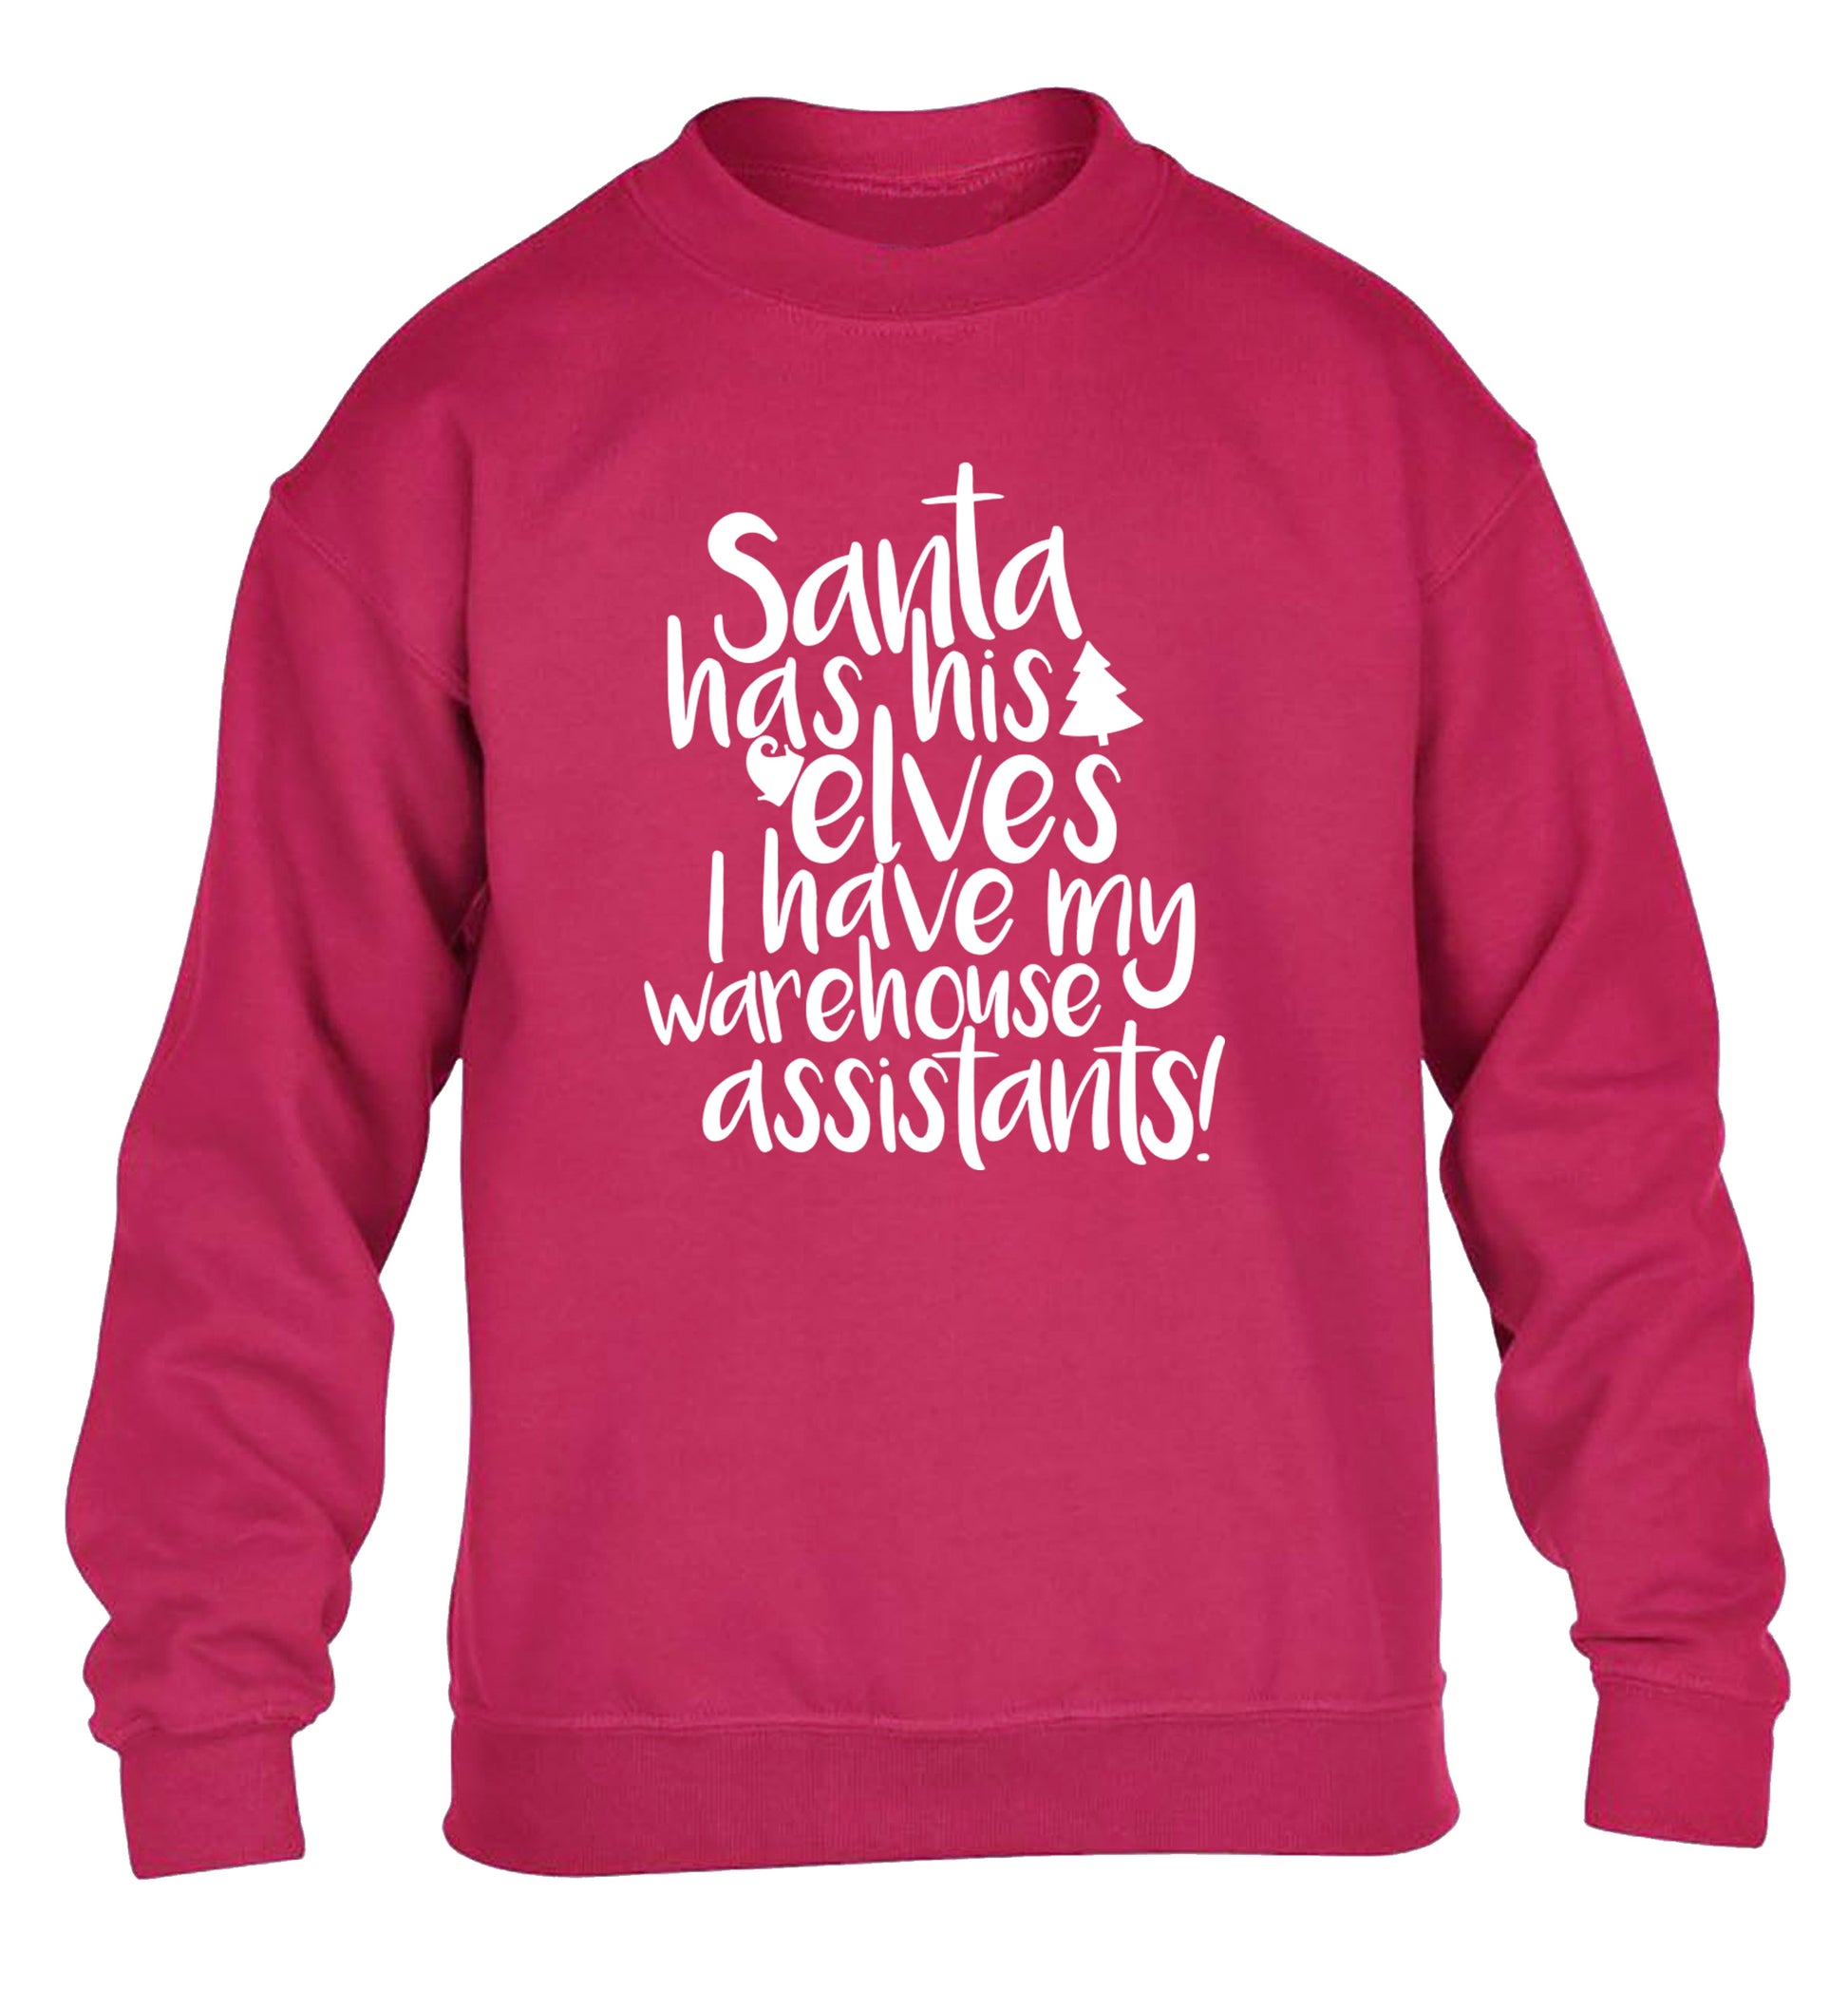 Santa has his elves I have my warehouse assistants children's pink sweater 12-14 Years